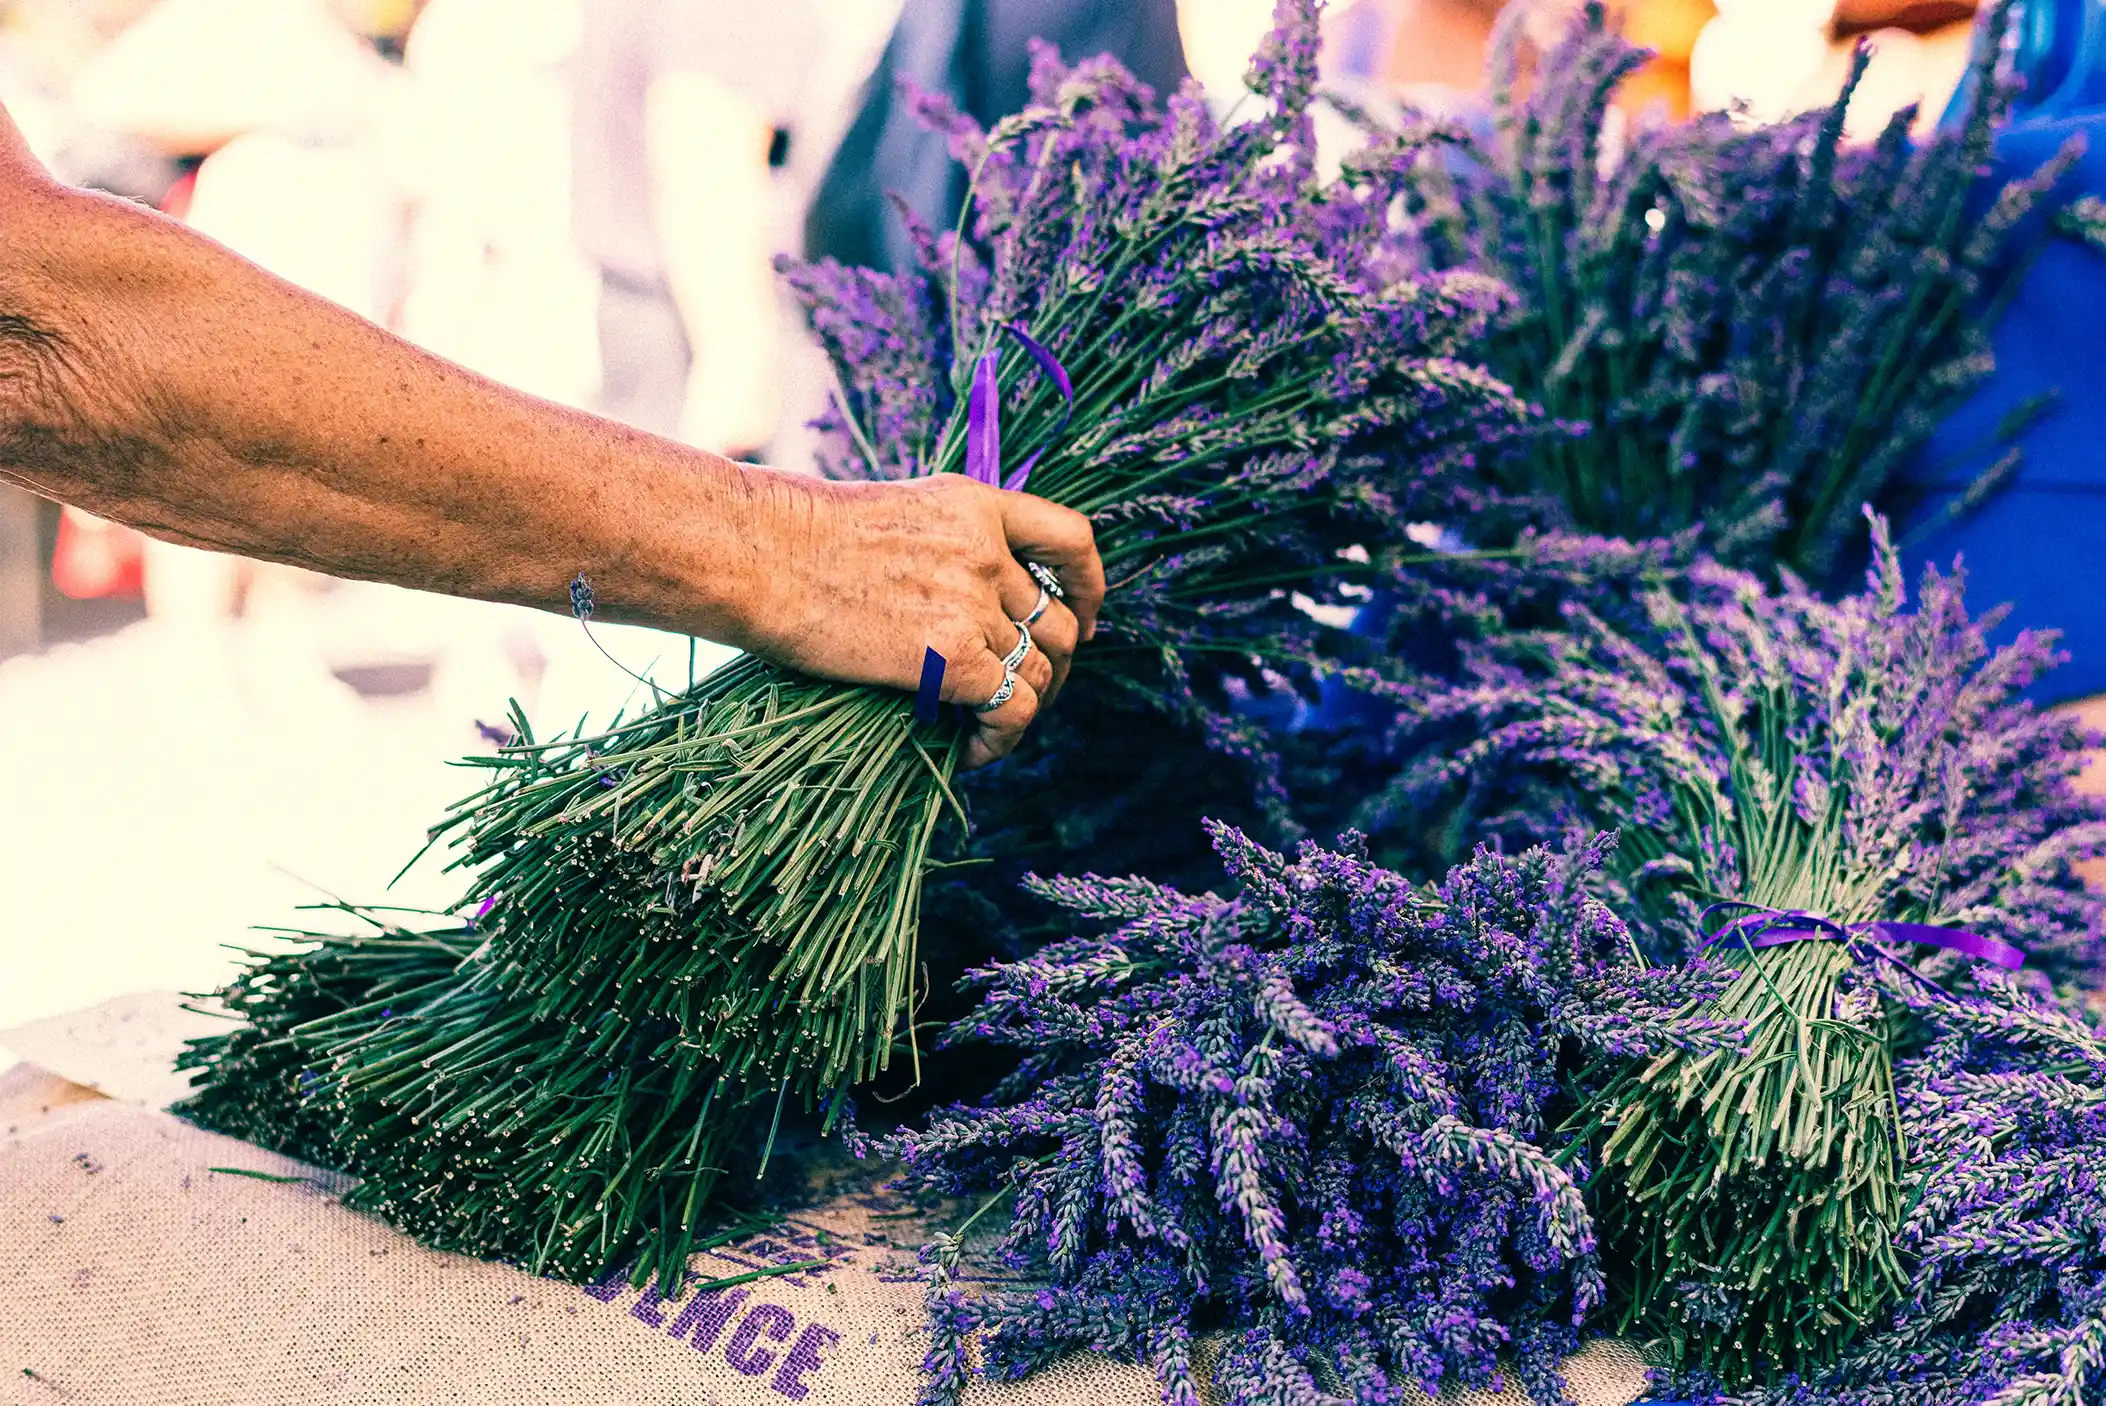 Women grabbing lavender at a french market.  